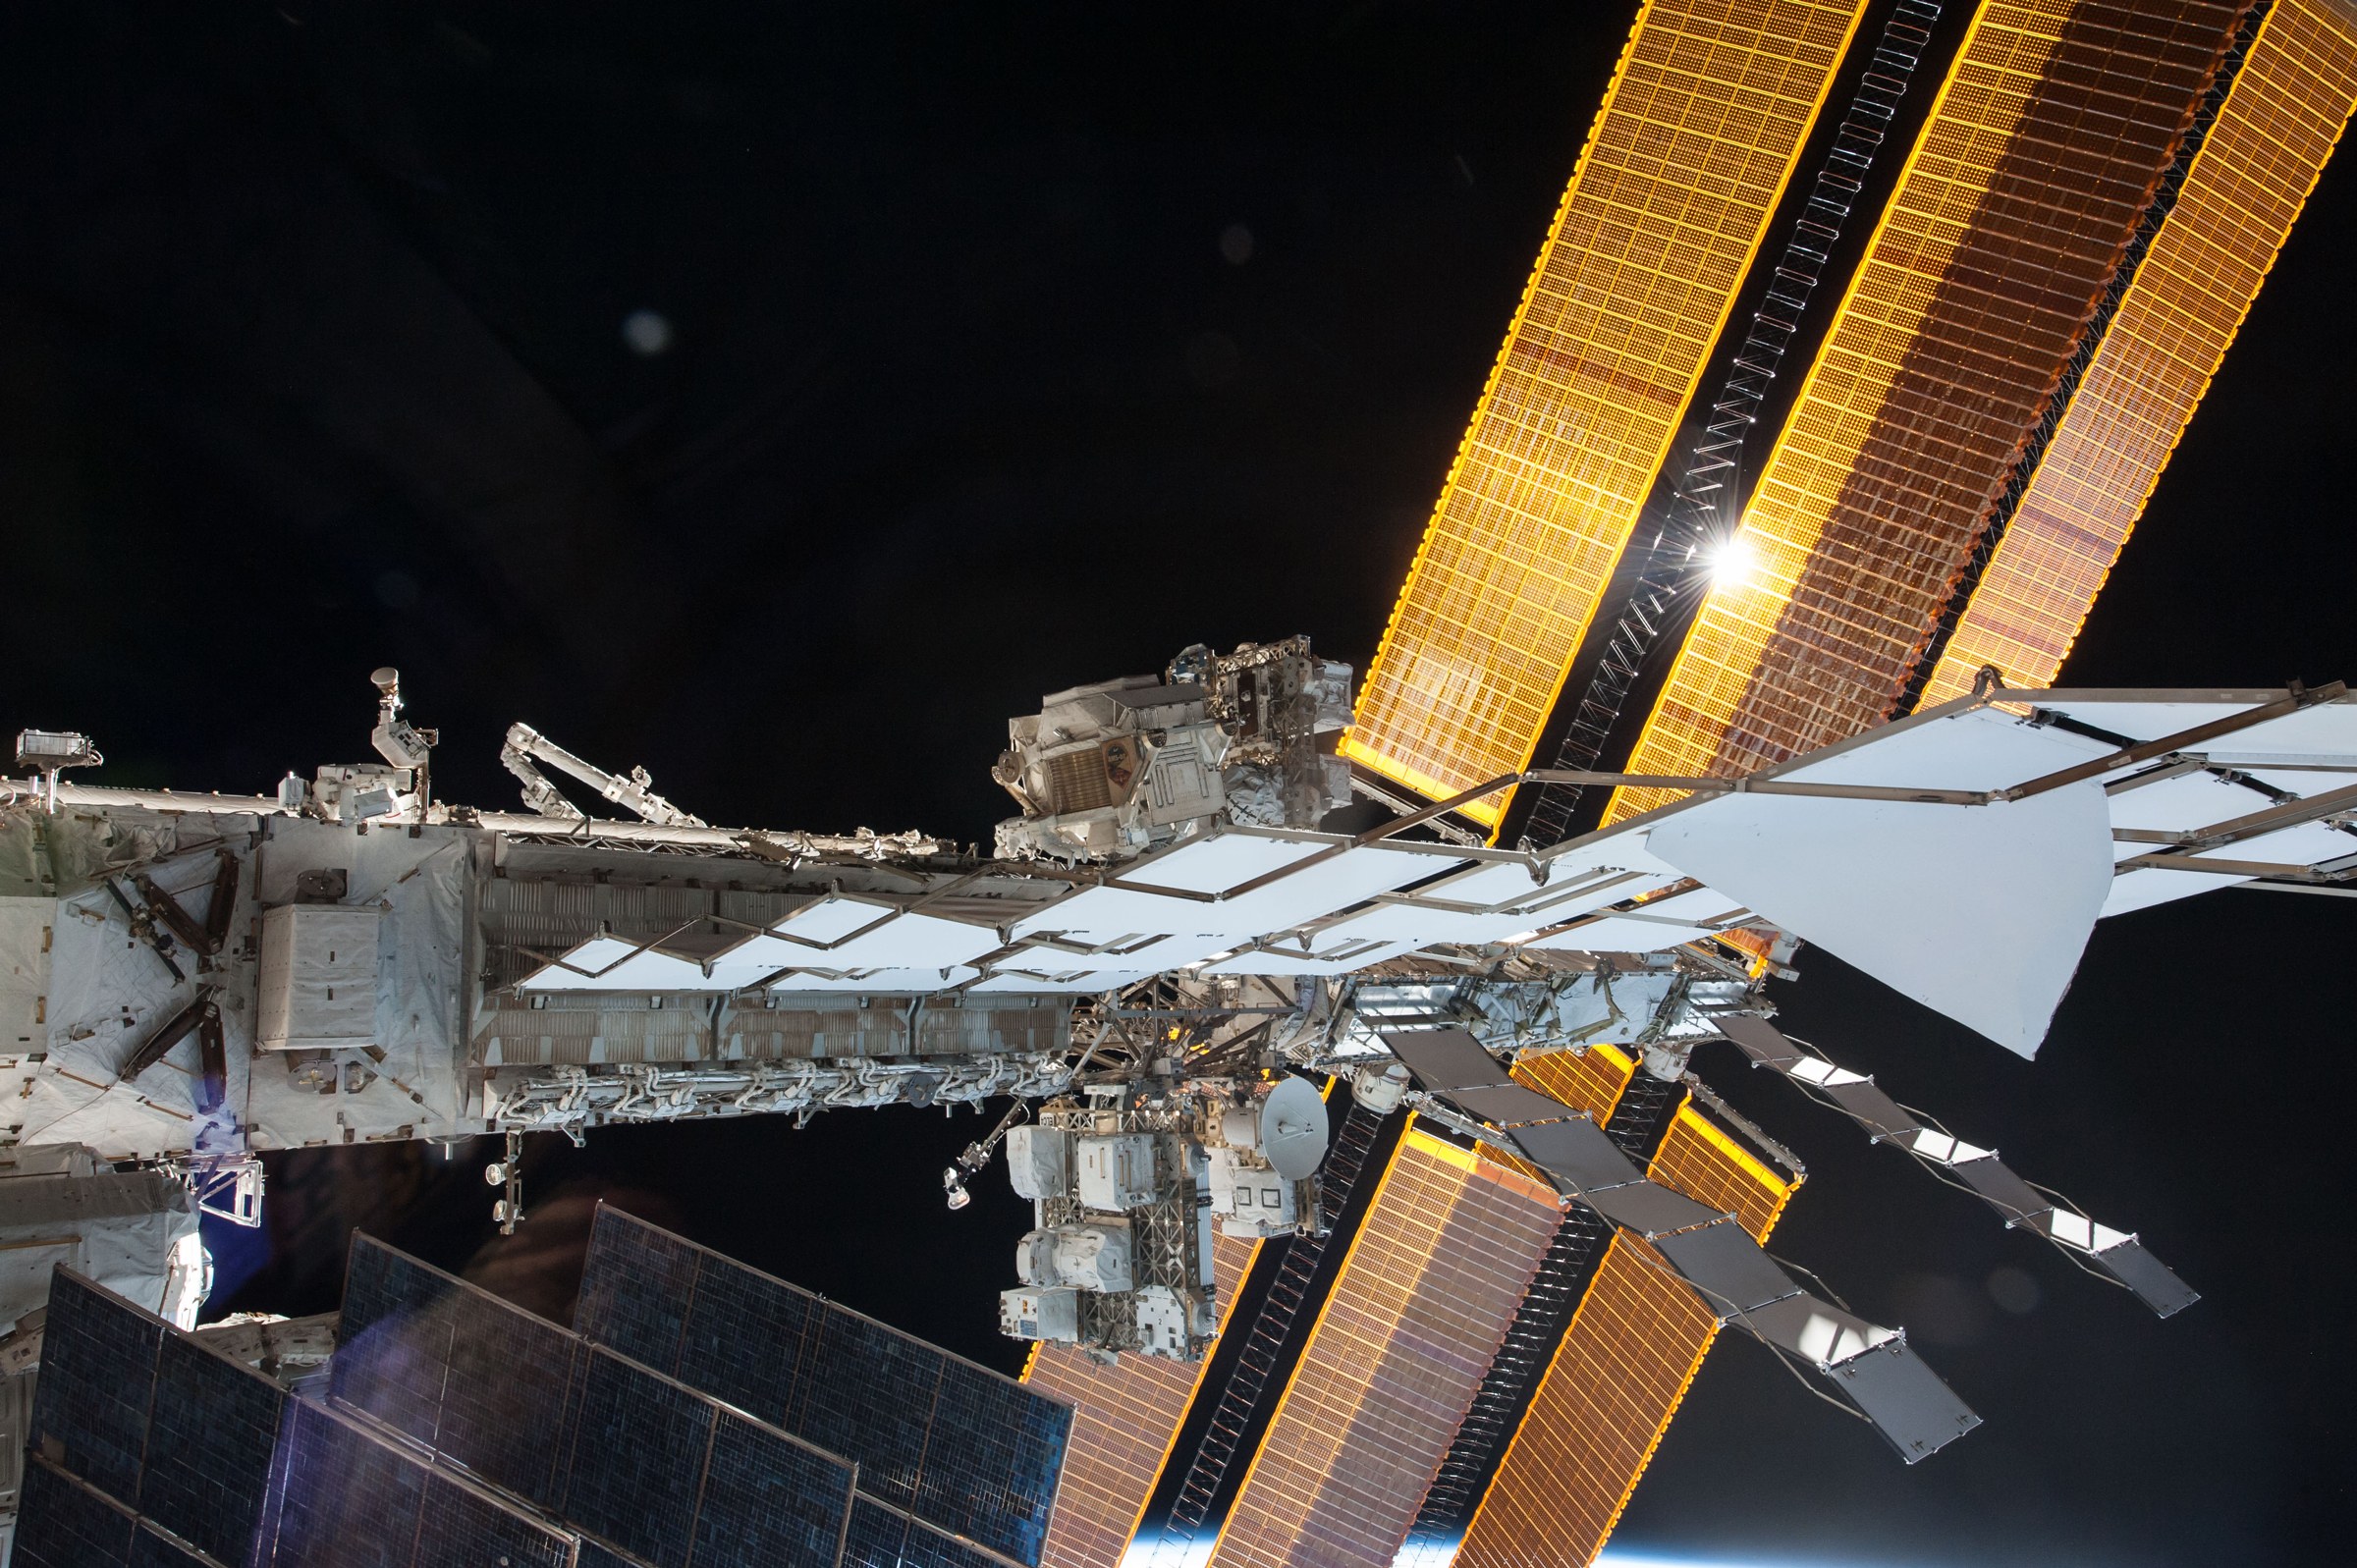 Space Photos of the Week: The ISS is Out of This World